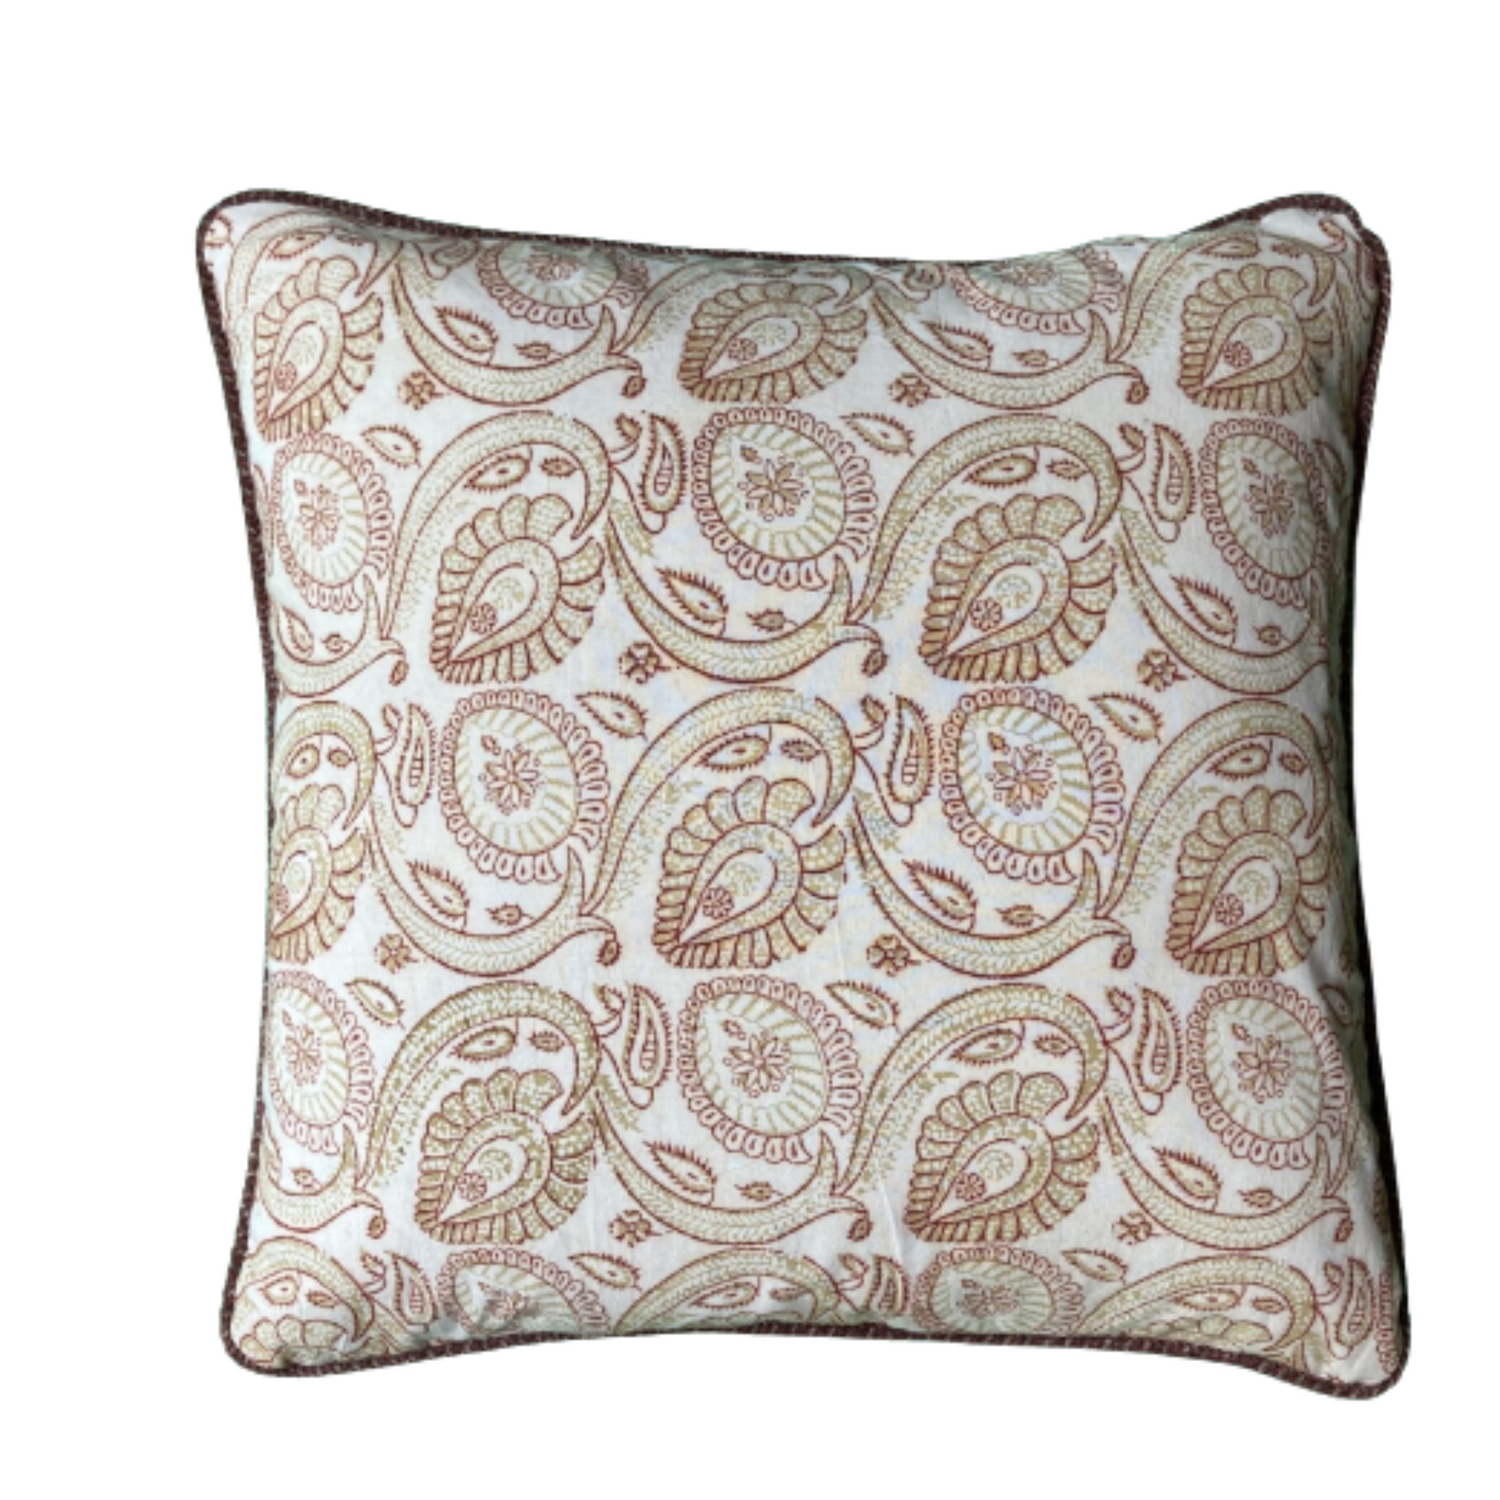 Paisley Hand Block Print Indiennes Pillow 20 X 20 Square Decorative Pillow with Down Feather Insert